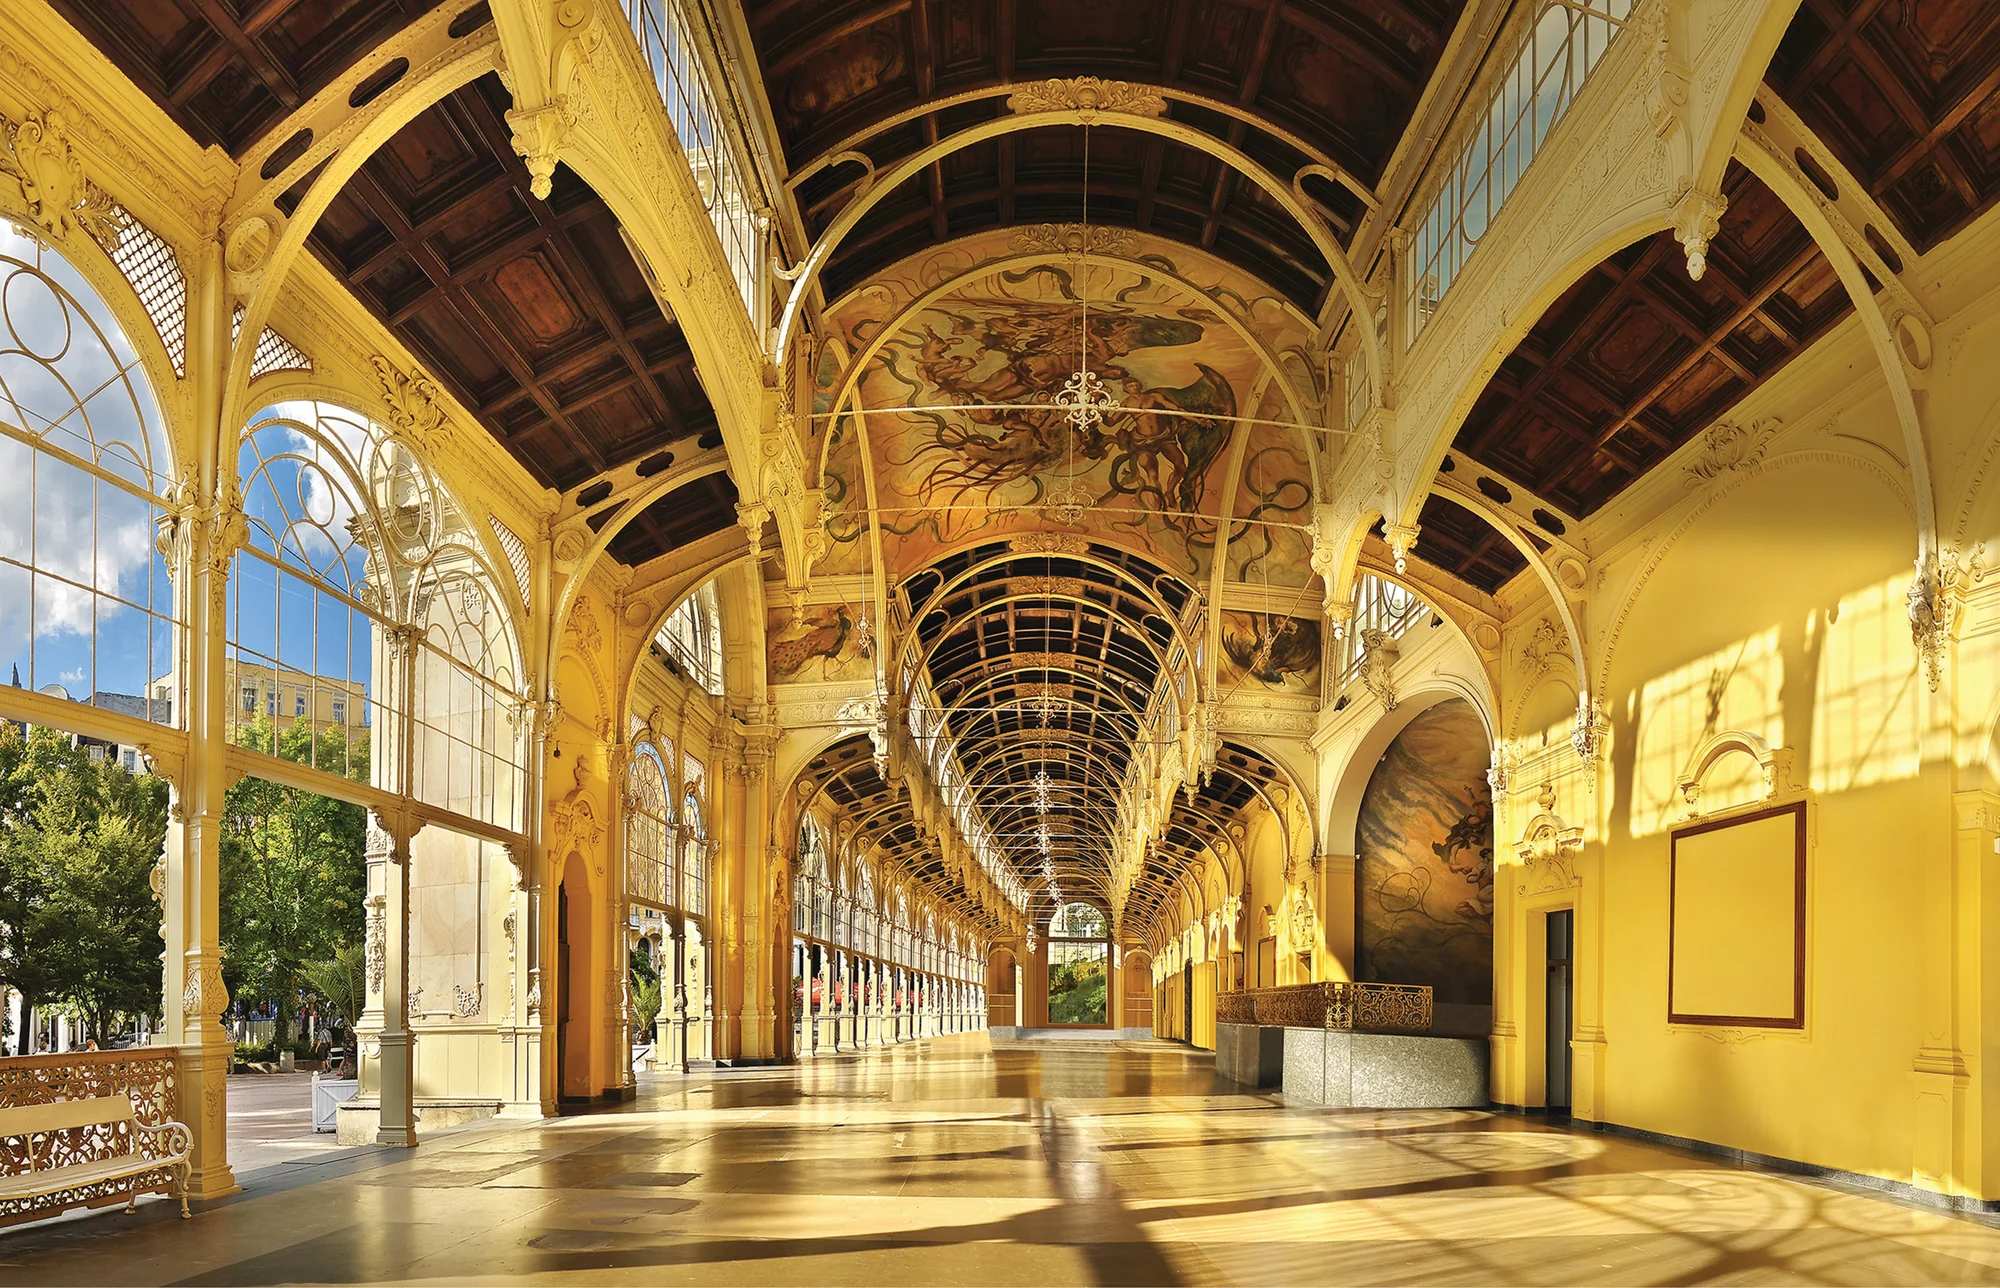 A  long hallway of golden yellow arches with seeping sunlight and decorated walls.